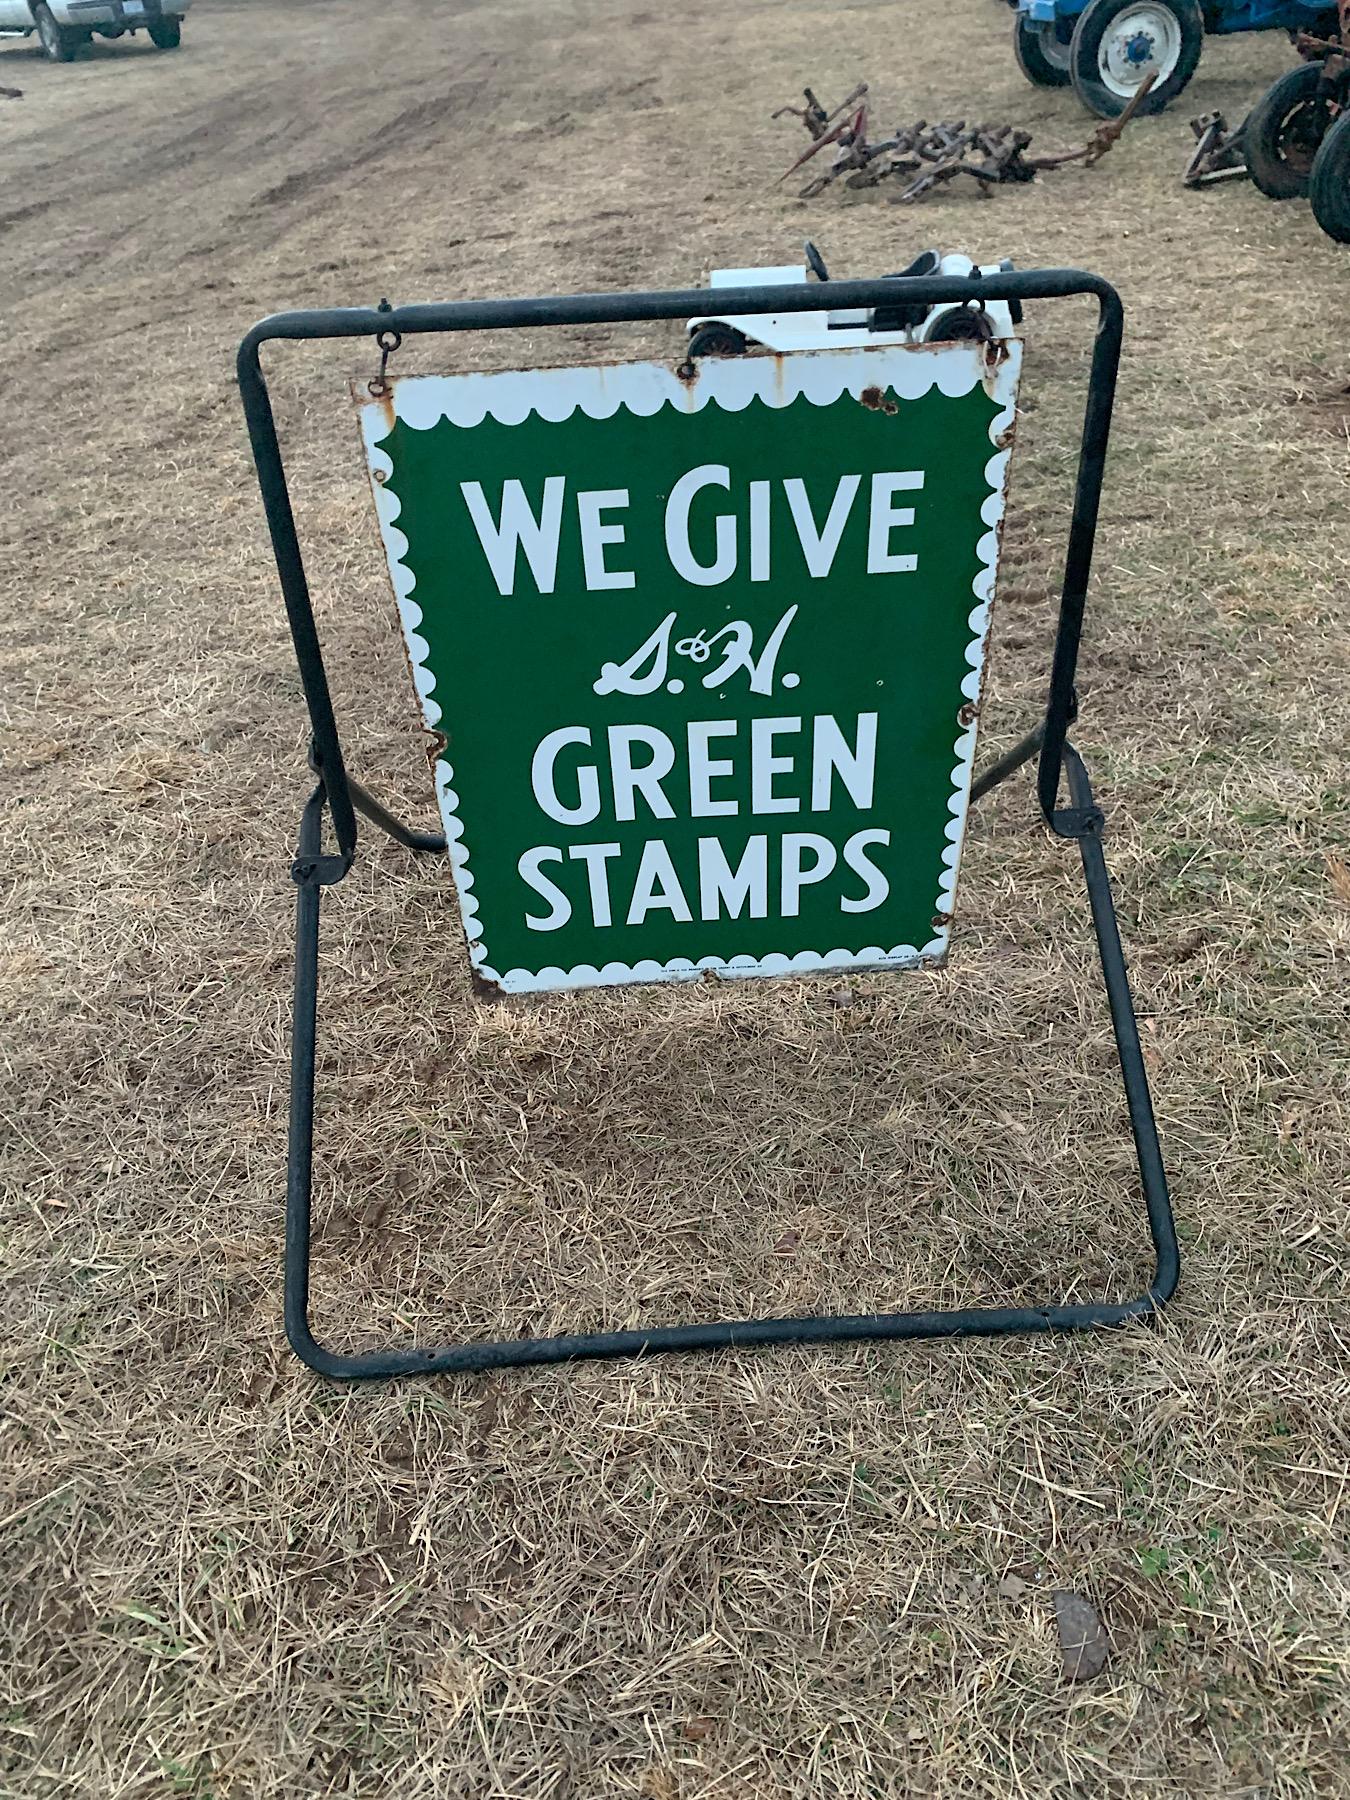 1947 S&H Green Stamps Sign